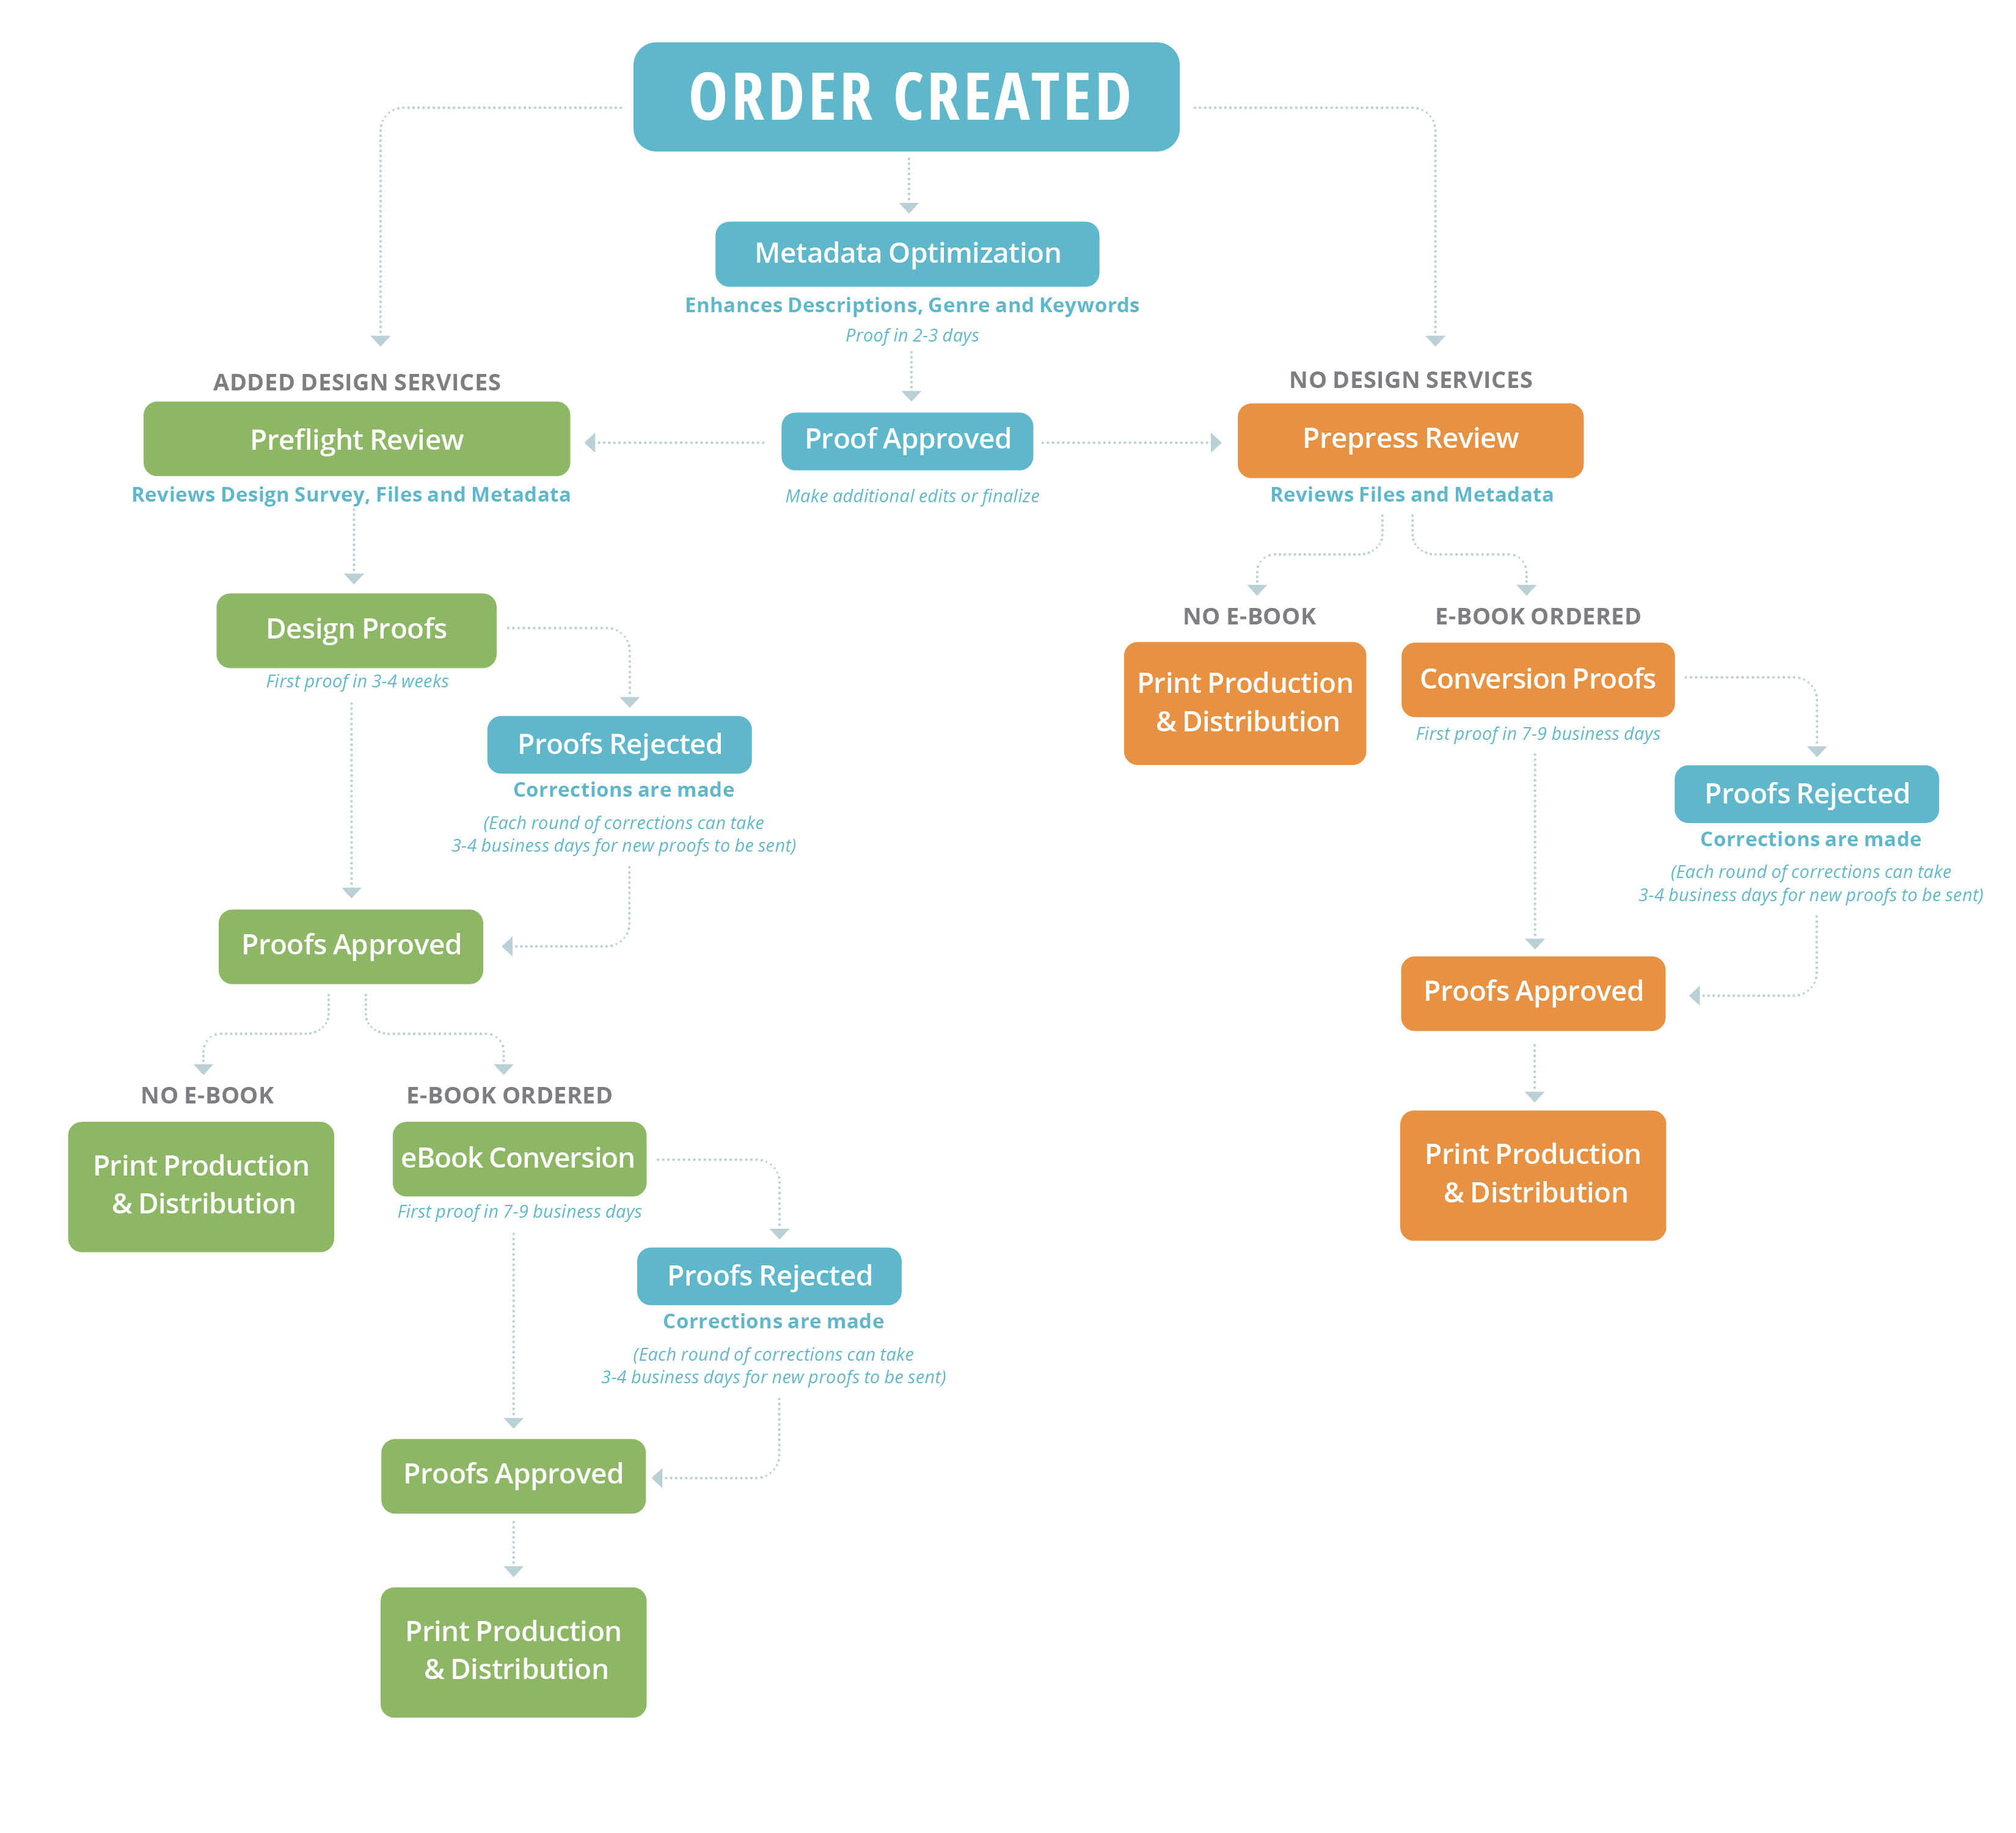 ORDER_CREATED_infographic__002_.jpg